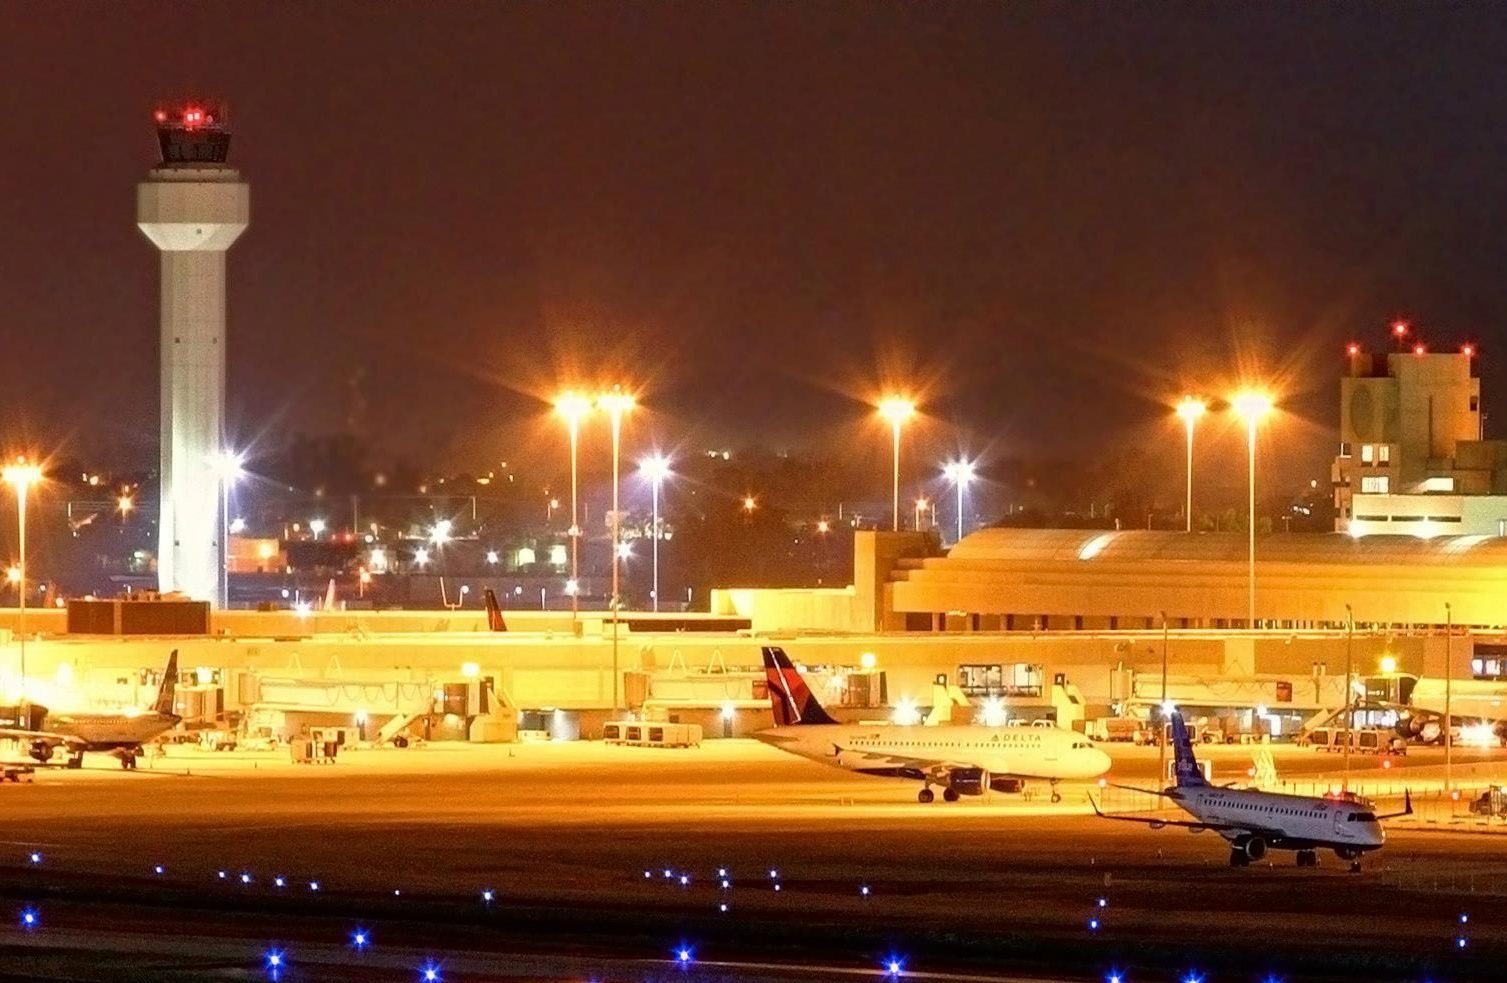 Palm Beach International airport at night overlooking its leased lands in West Palm Beach, Florida.  